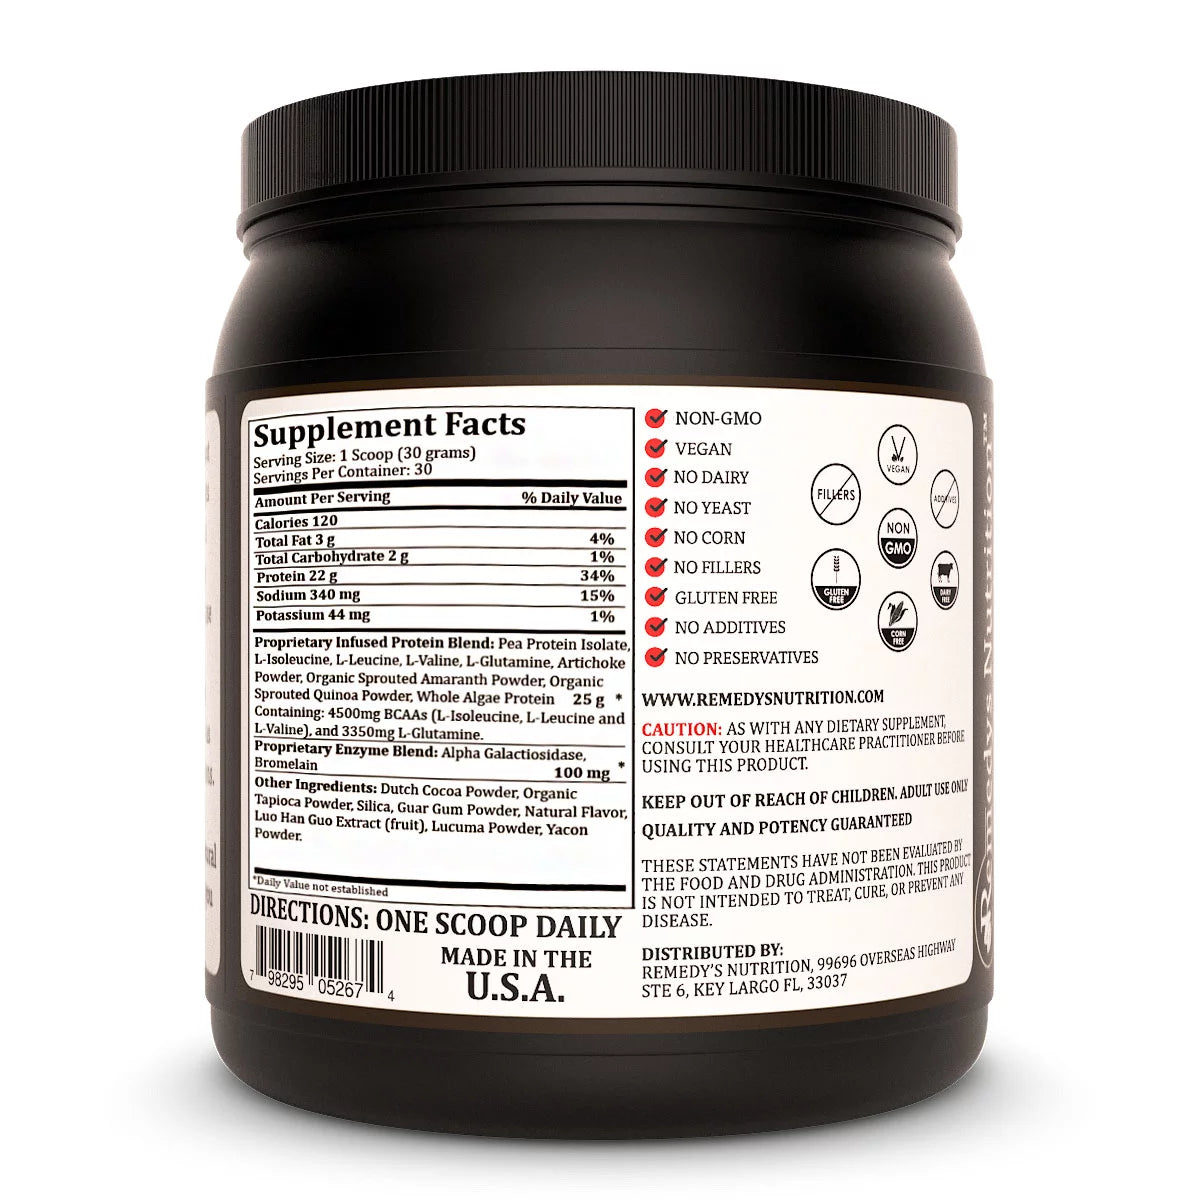 Image of Remedy's Nutrition® Chocolate Vegan Plant Protein Powder back label. Supplement Facts Ingredients Branch Amino Acids